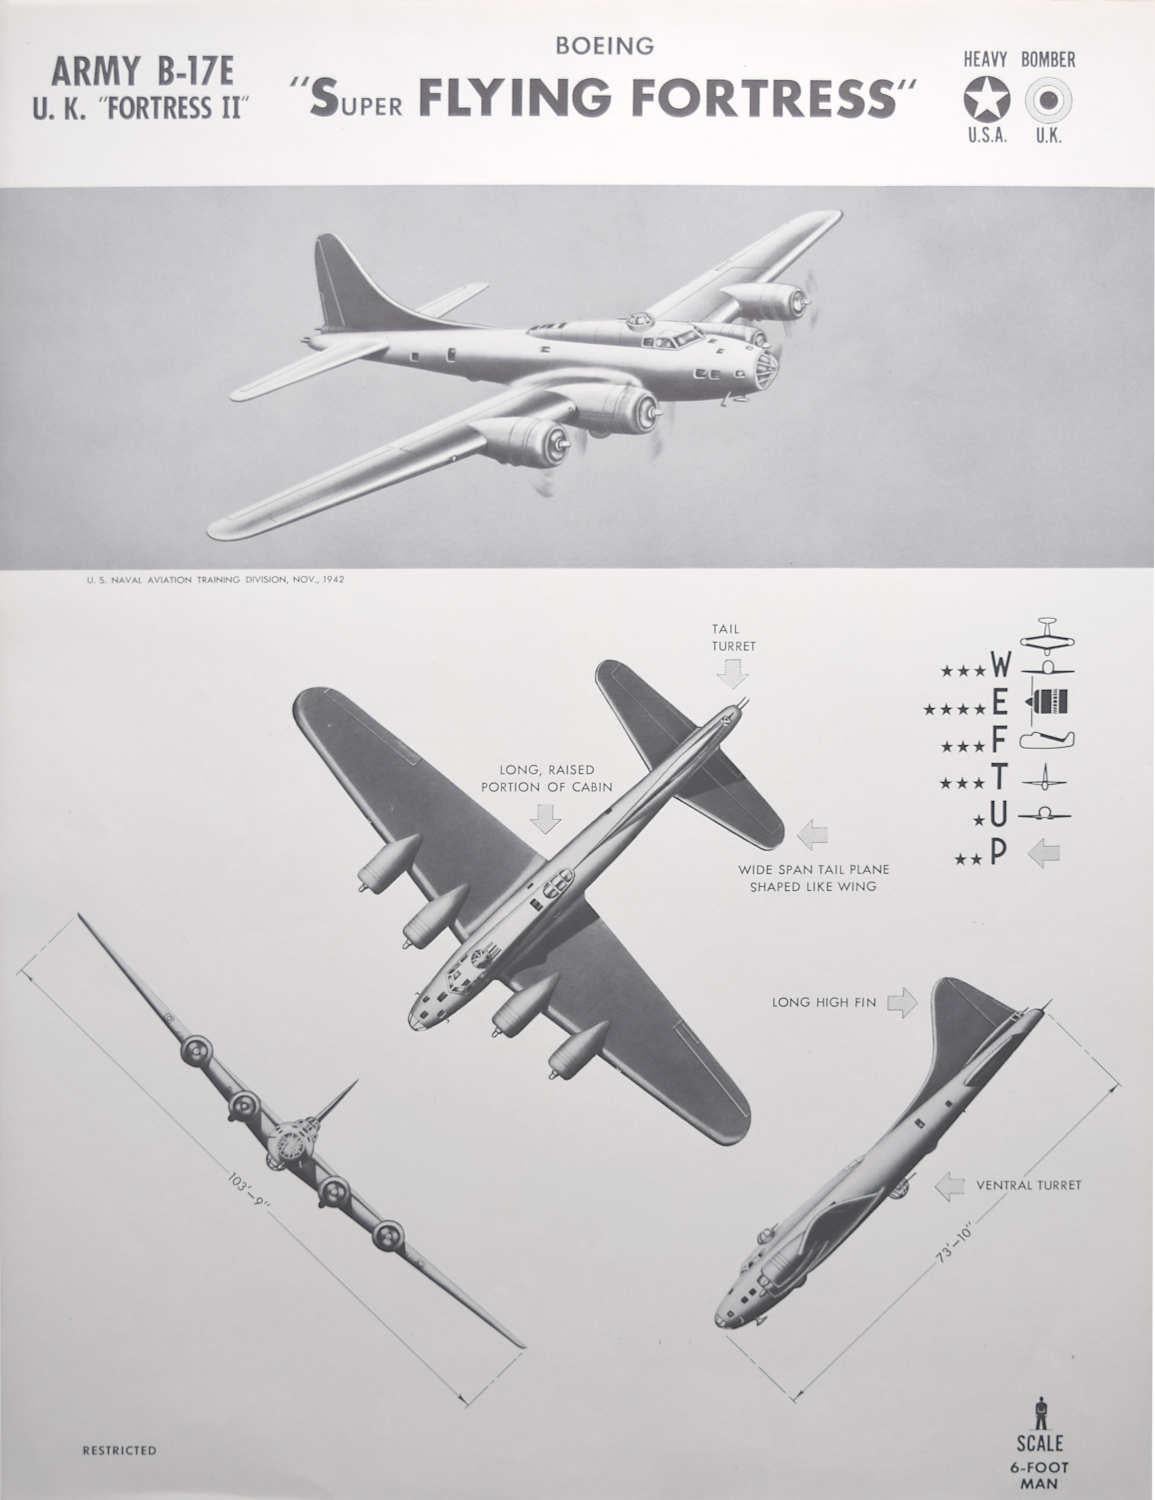 1942 Boeing B17 "Super Flying Fortress" US bomber identification poster WW2 - Print by Unknown